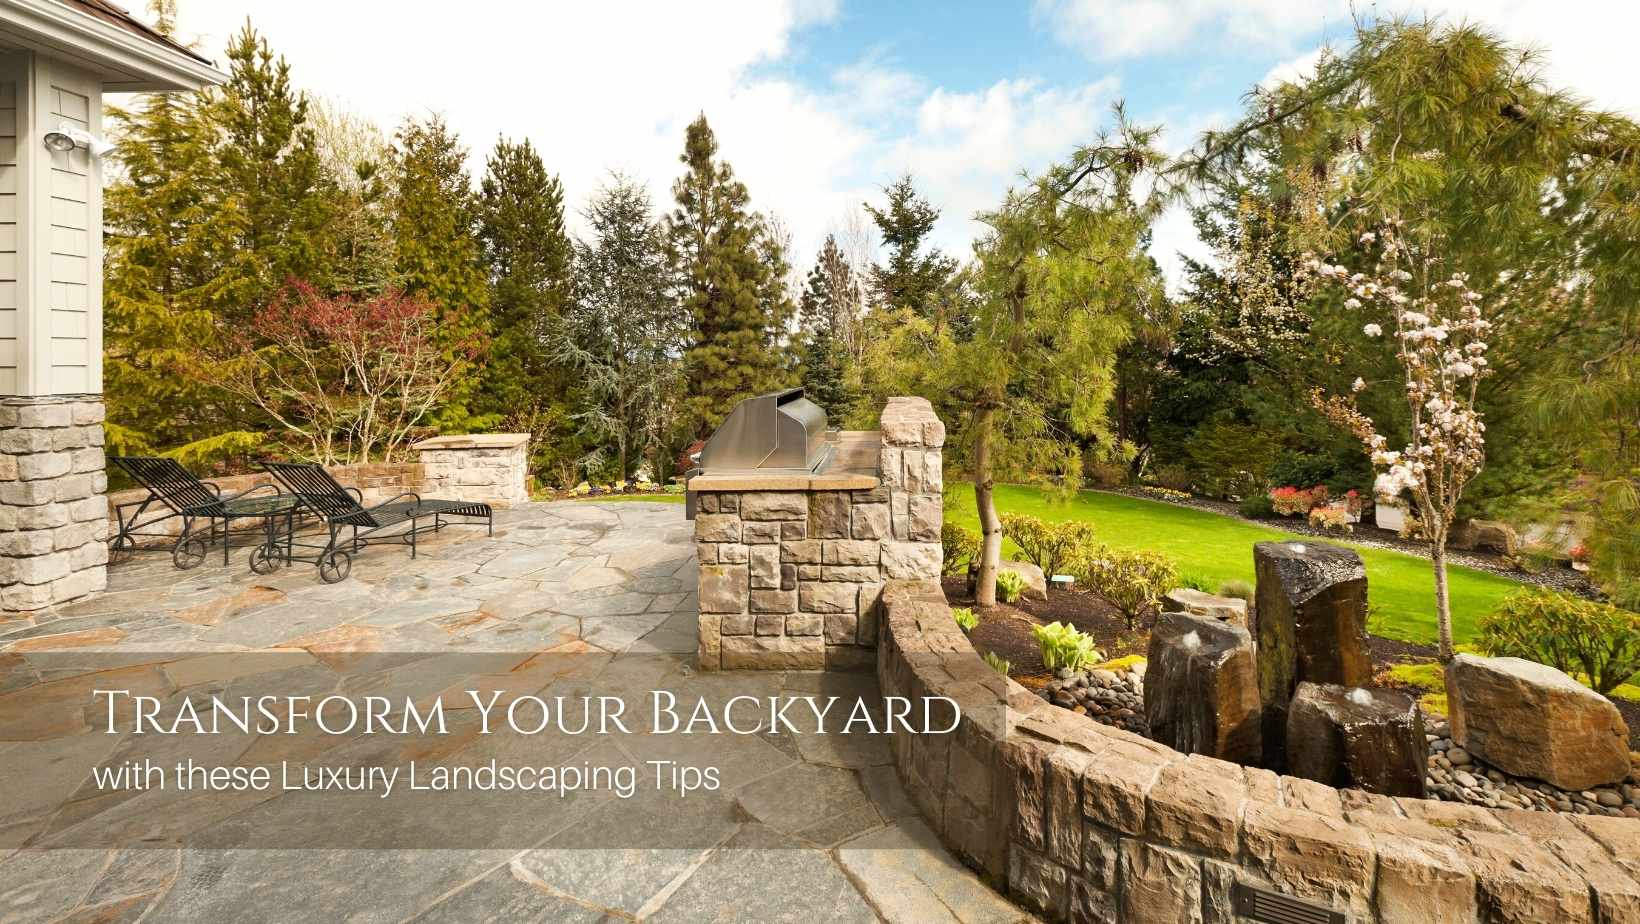 Transform Your Backyard with these Luxury Landscaping Tips